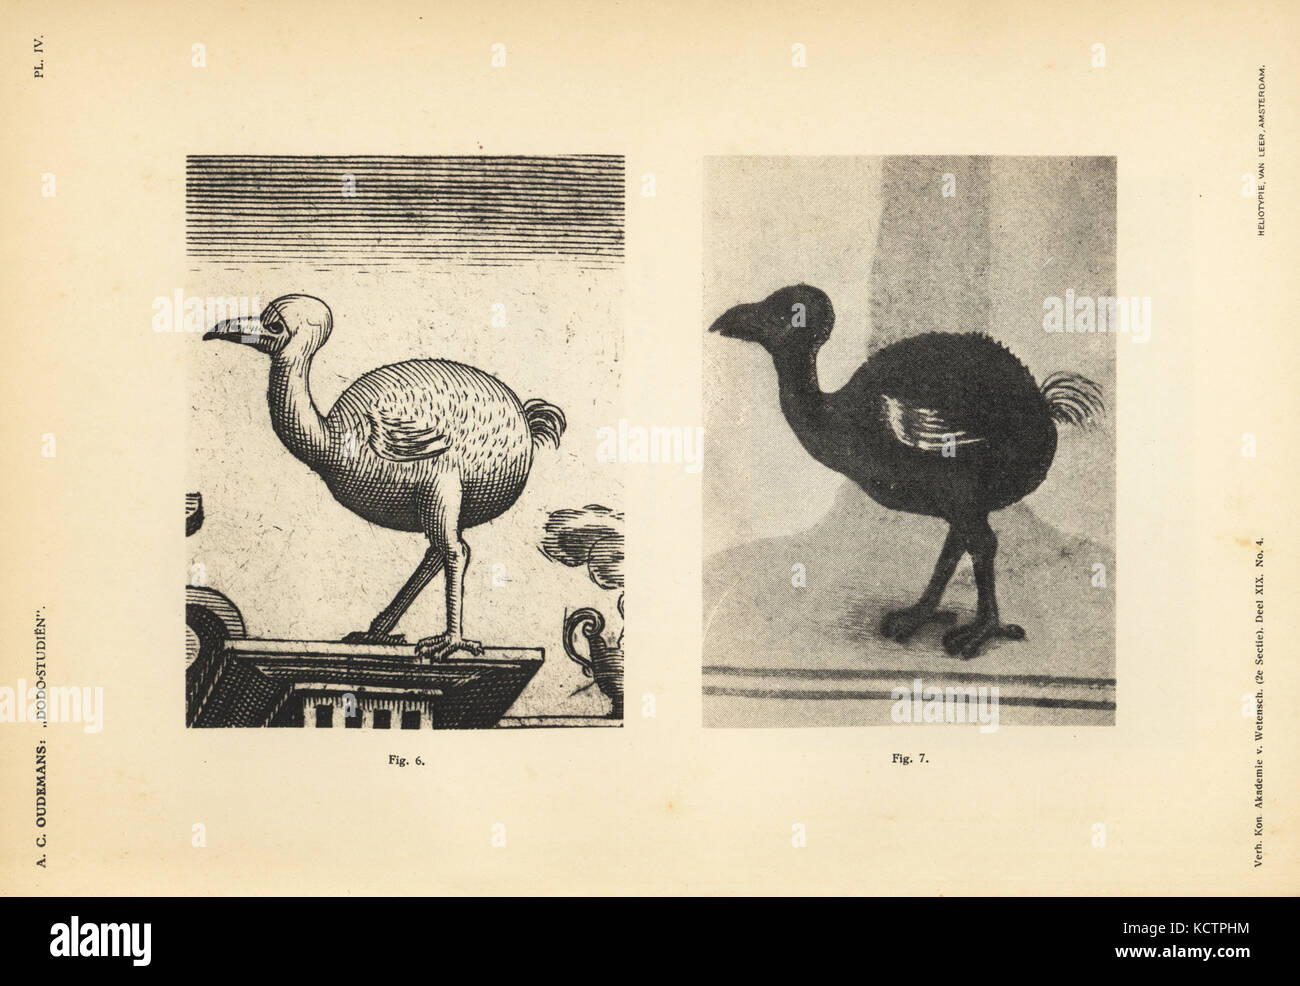 Dodo of Iohan Theodor and Iohan Israel de Bry, female, 1601, and copy in the Florence Codex, female, circa 1703. Heliotype by Van Leer from Dr. Anthonie Cornelis Oudemans' Dodo Studies, Amsterdam, Johannes Muller, 1917. Stock Photo